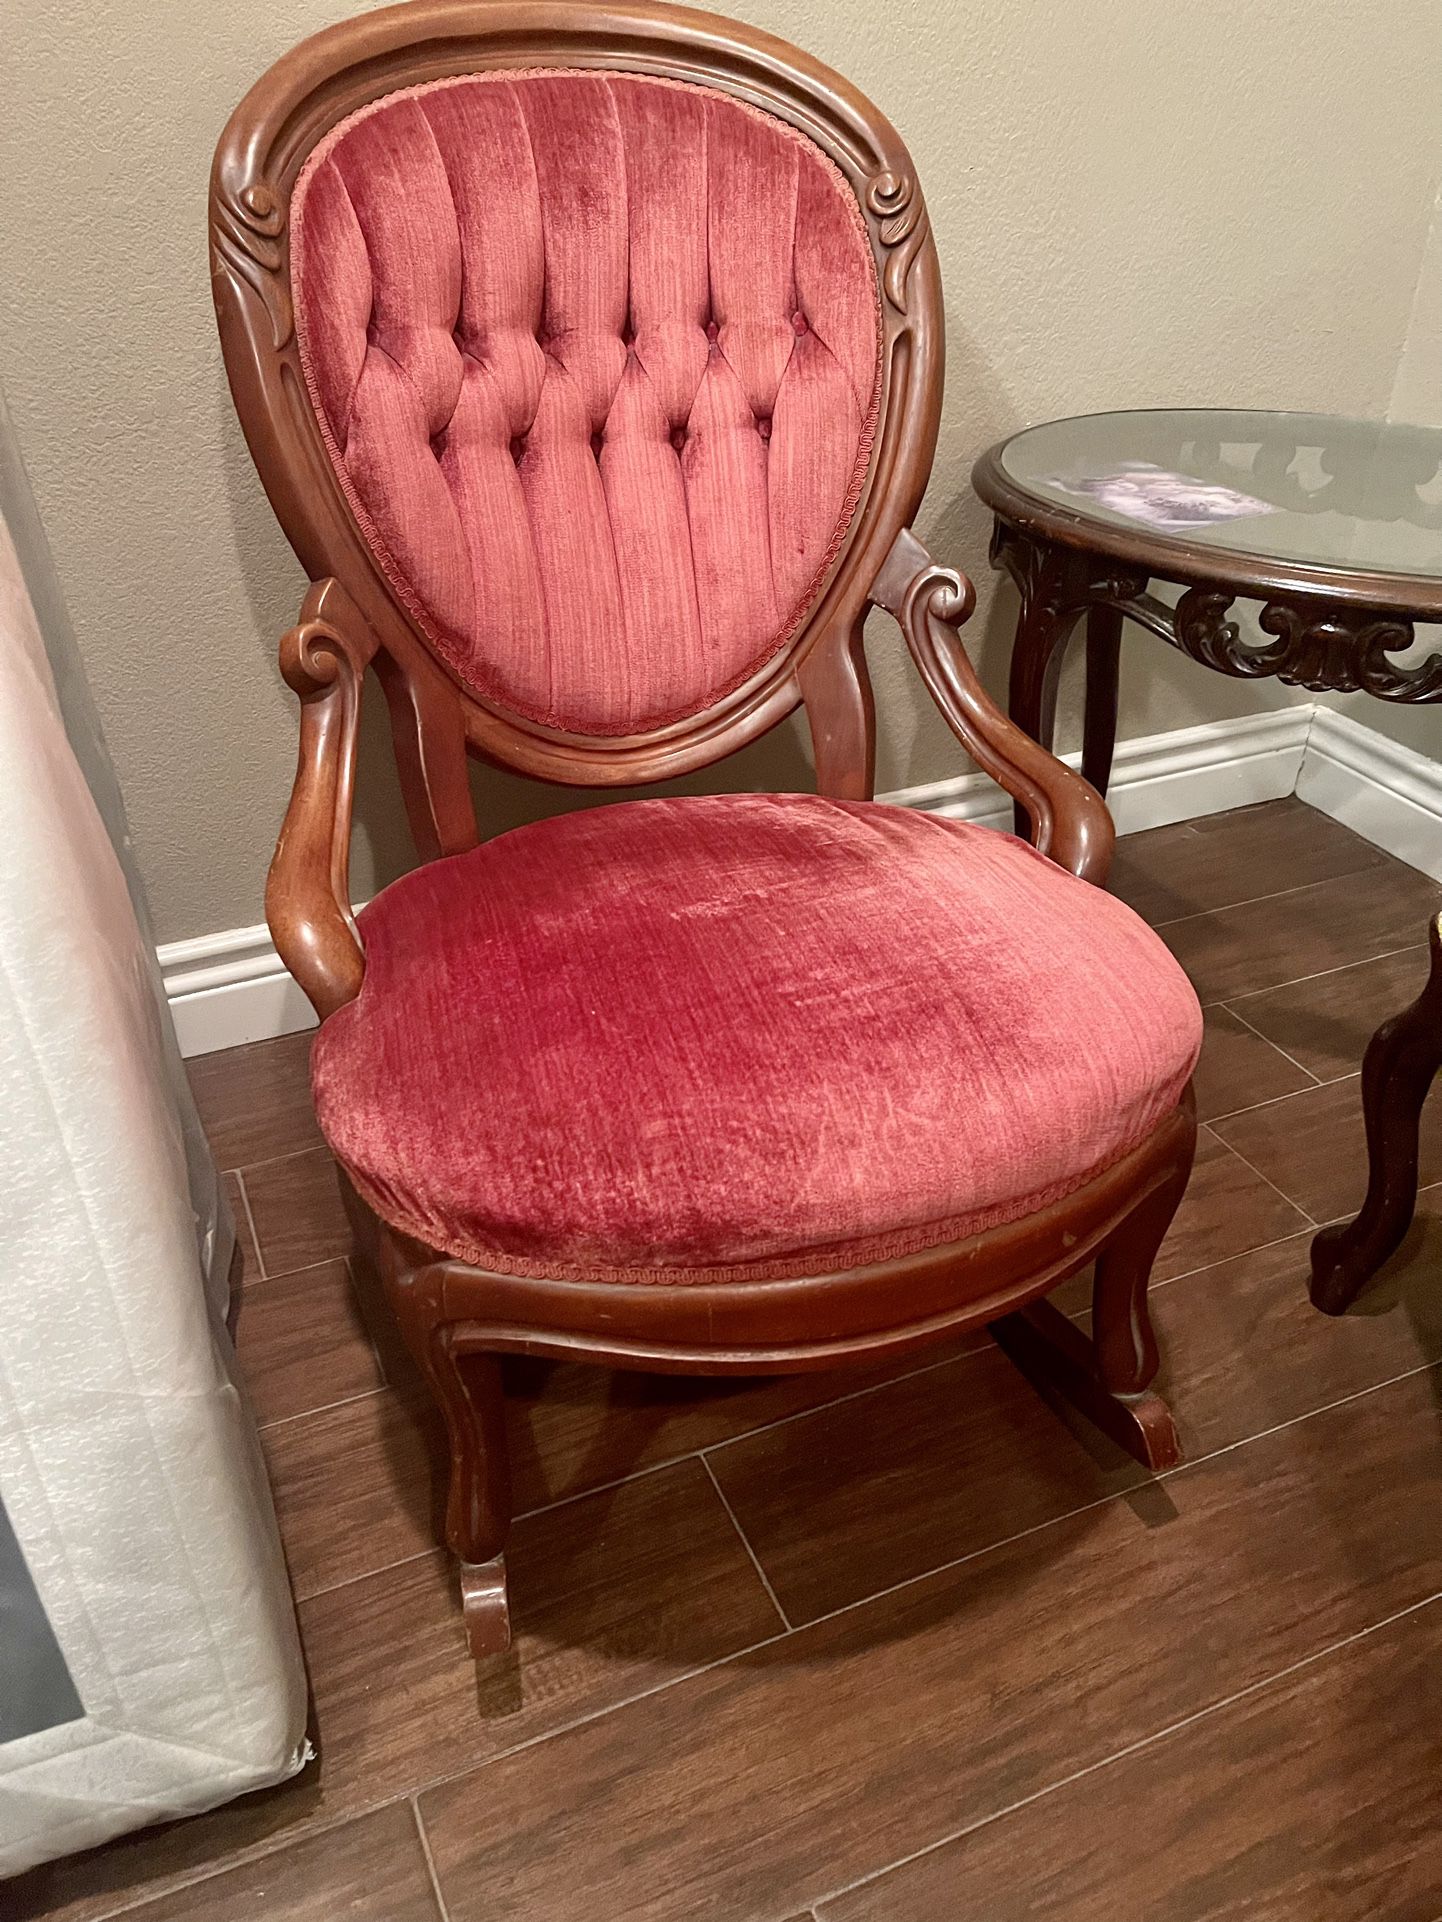 Antique Victorian Chair and Rocking Chair